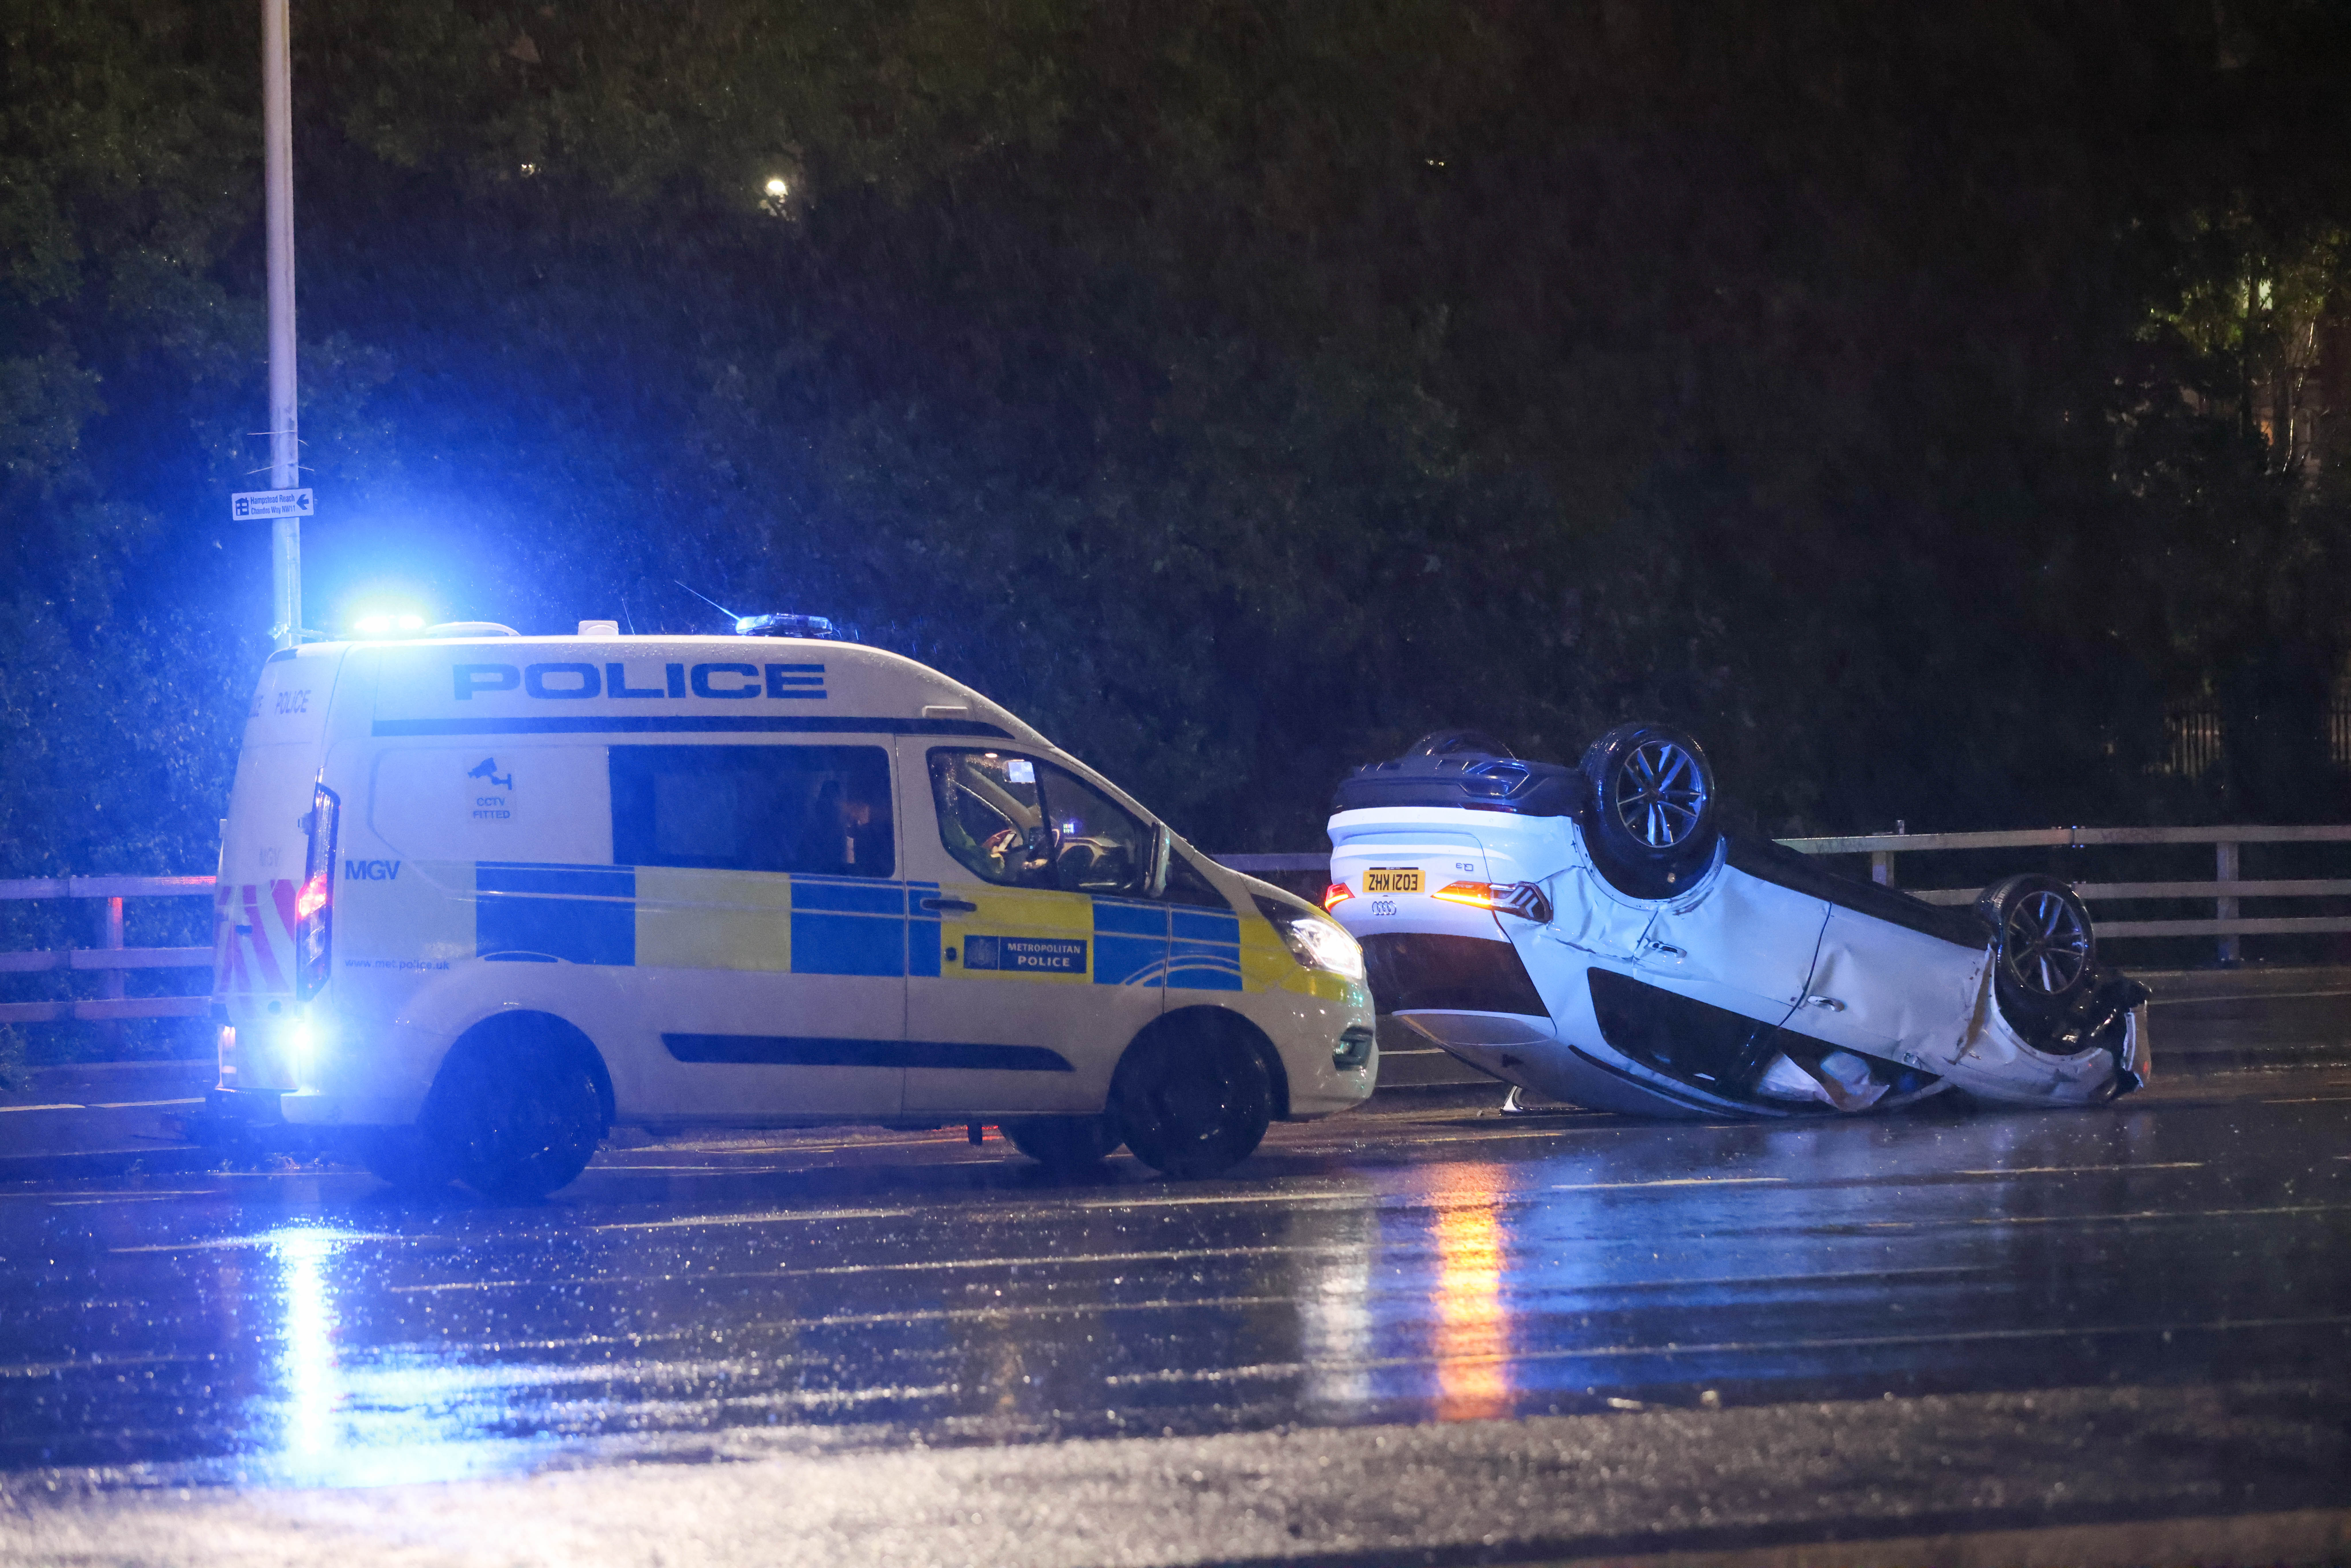 Severe flooding in London has caused dangerous driving conditions with one motor flipping over